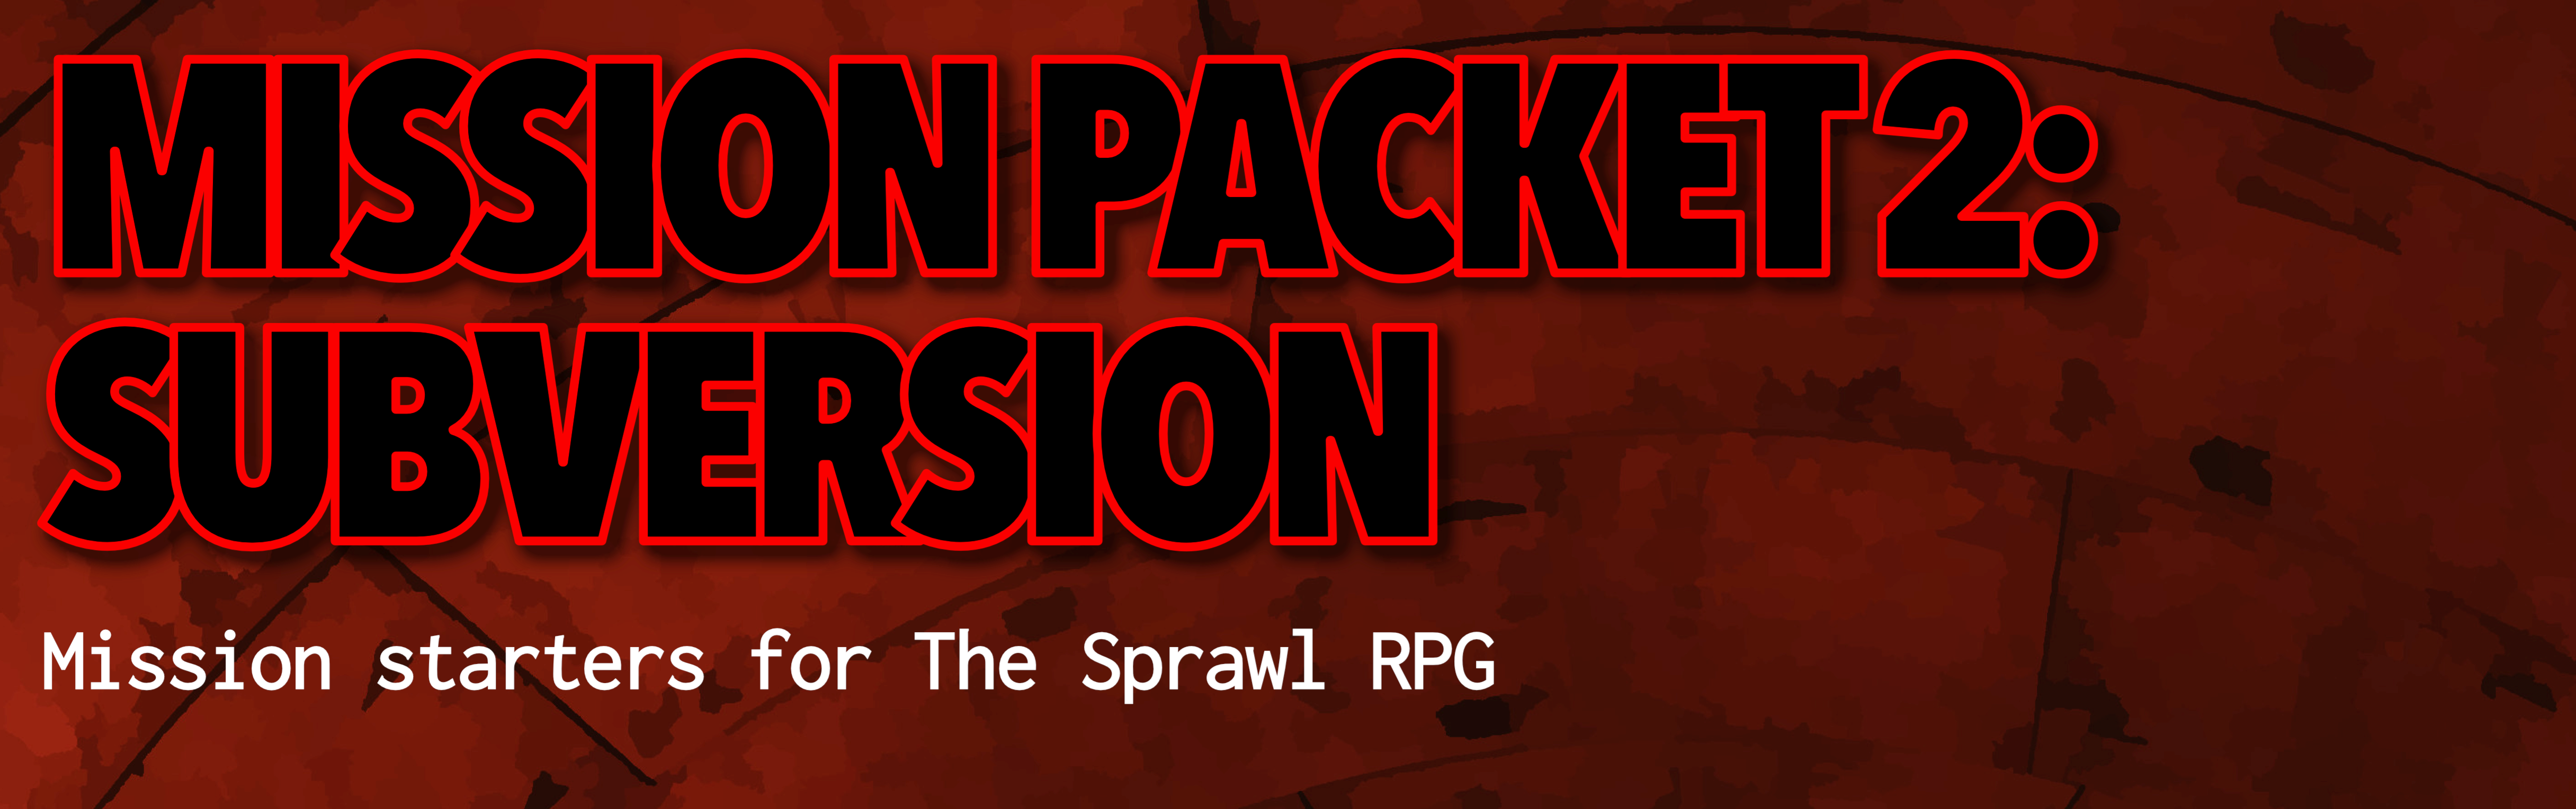 Mission Packet 2: Subversion